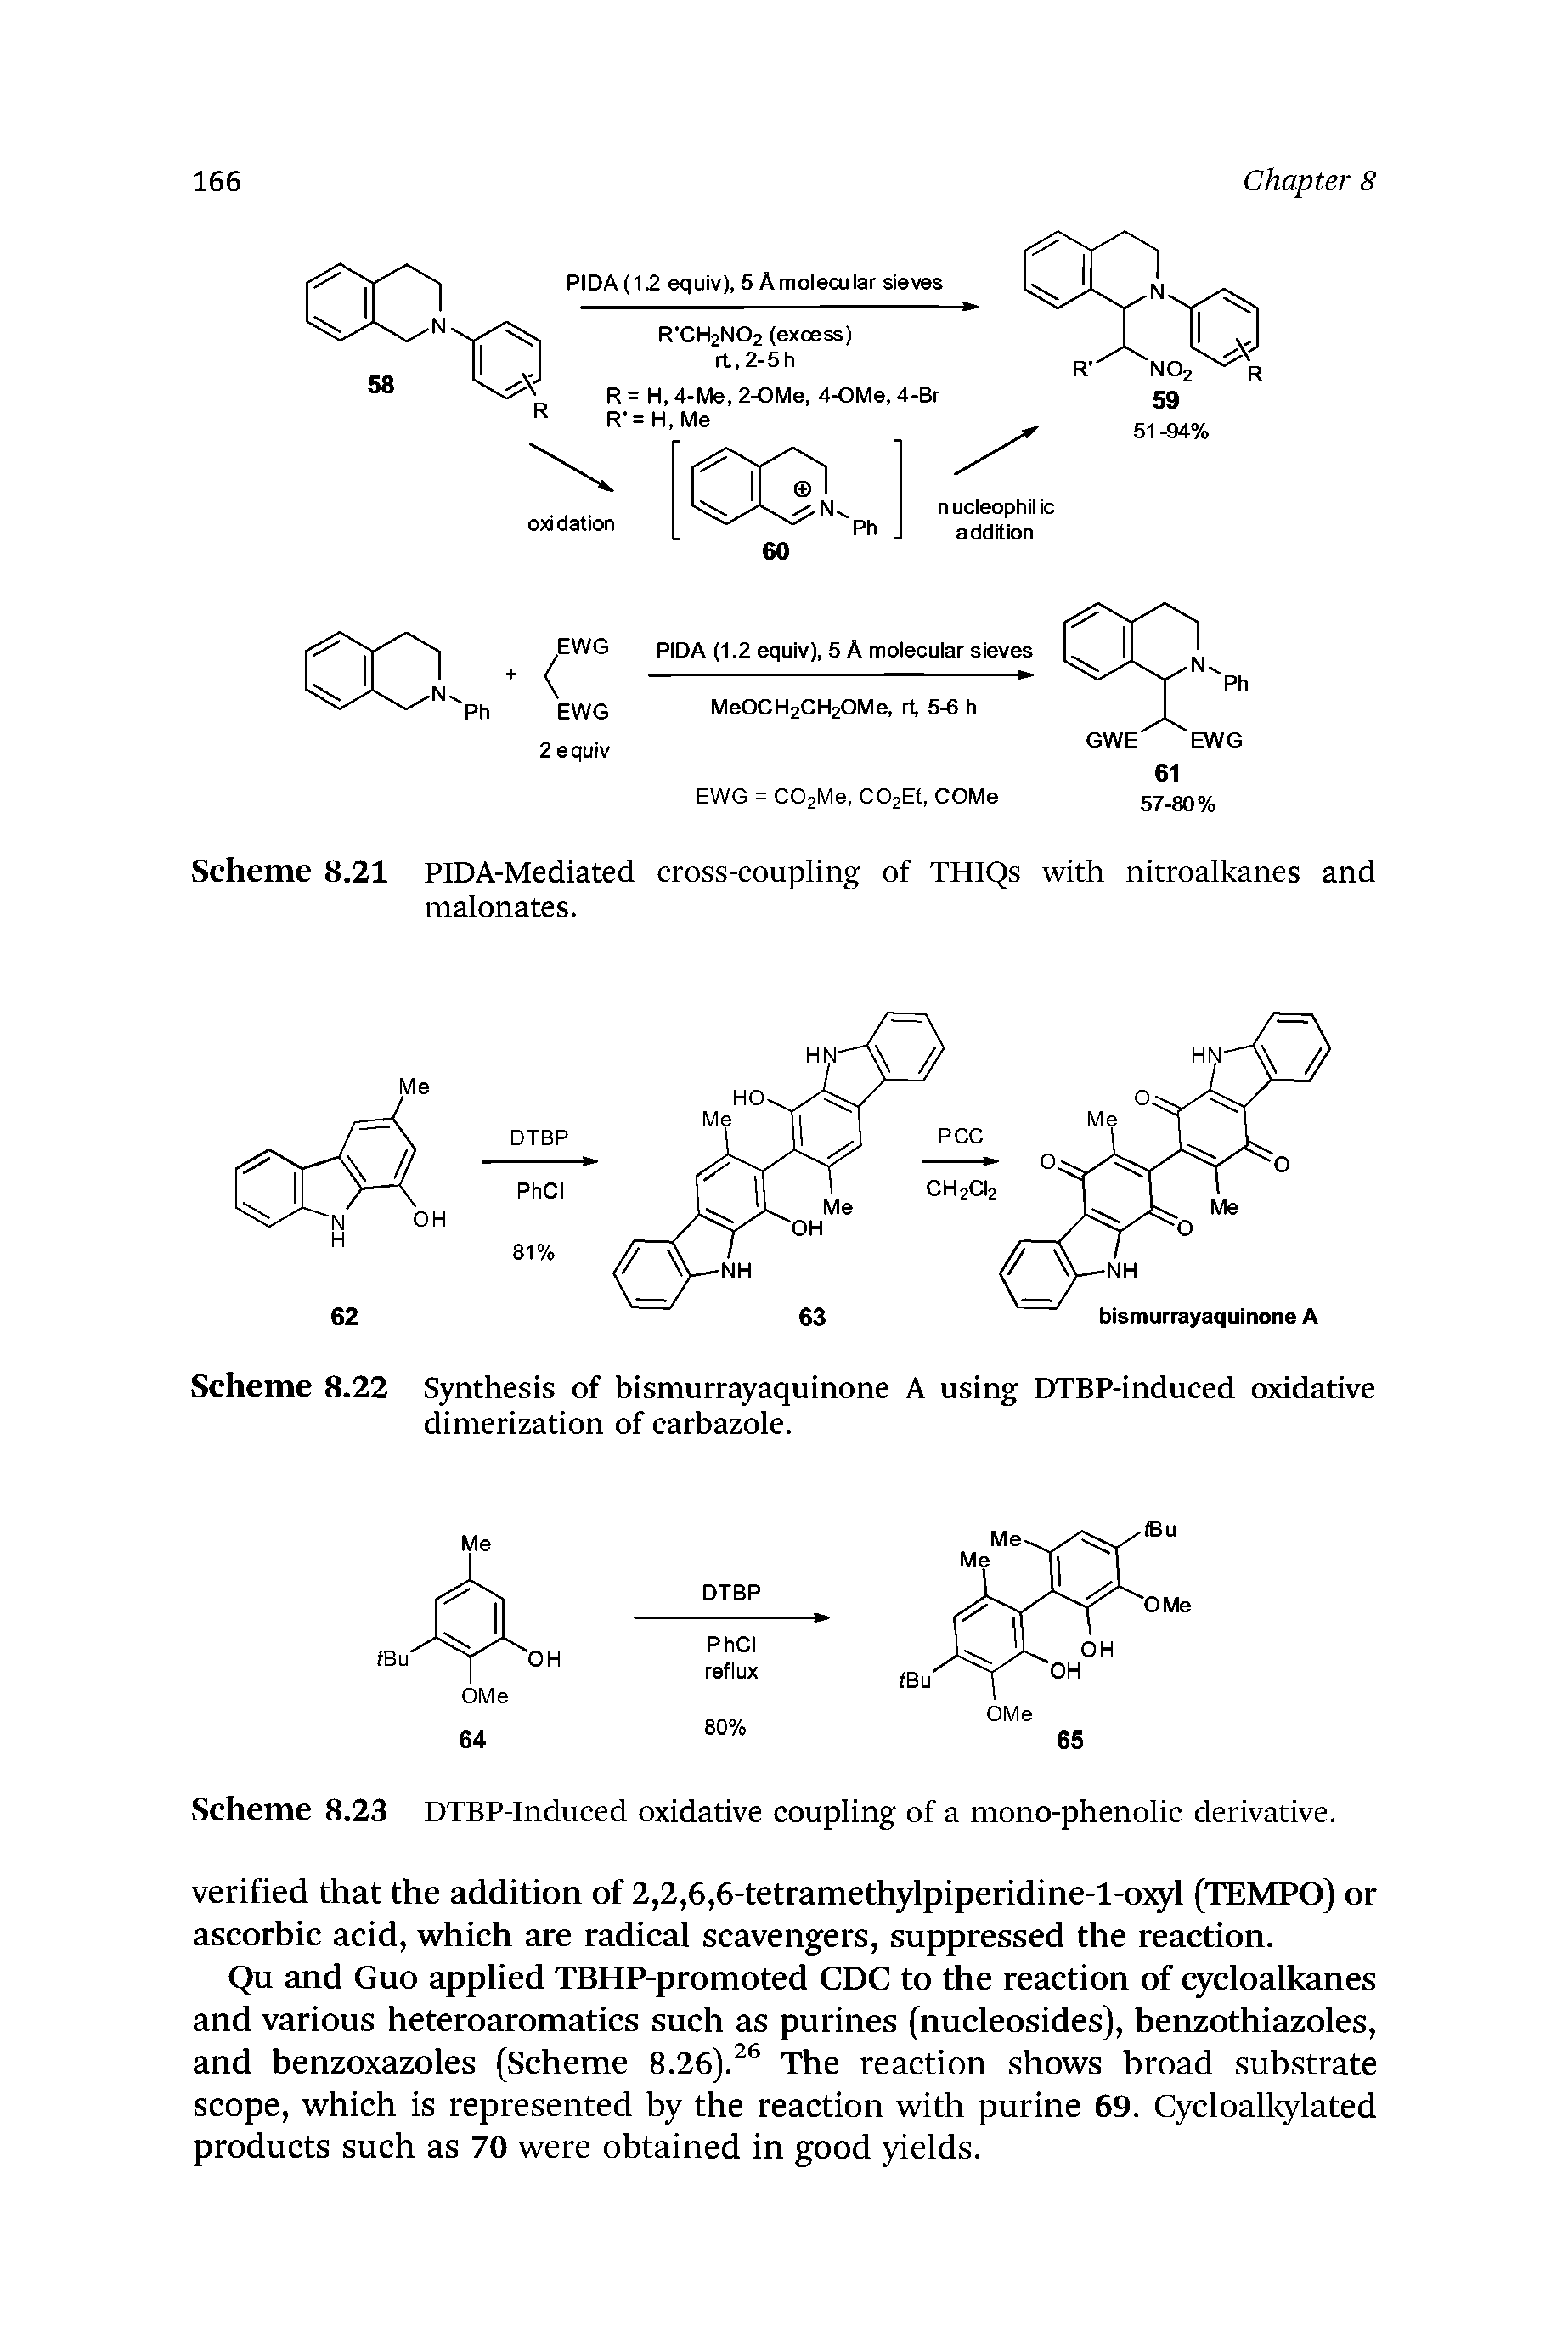 Scheme 8.22 Synthesis of bismurrayaquinone A using DTBP-induced oxidative dimerization of carbazole.